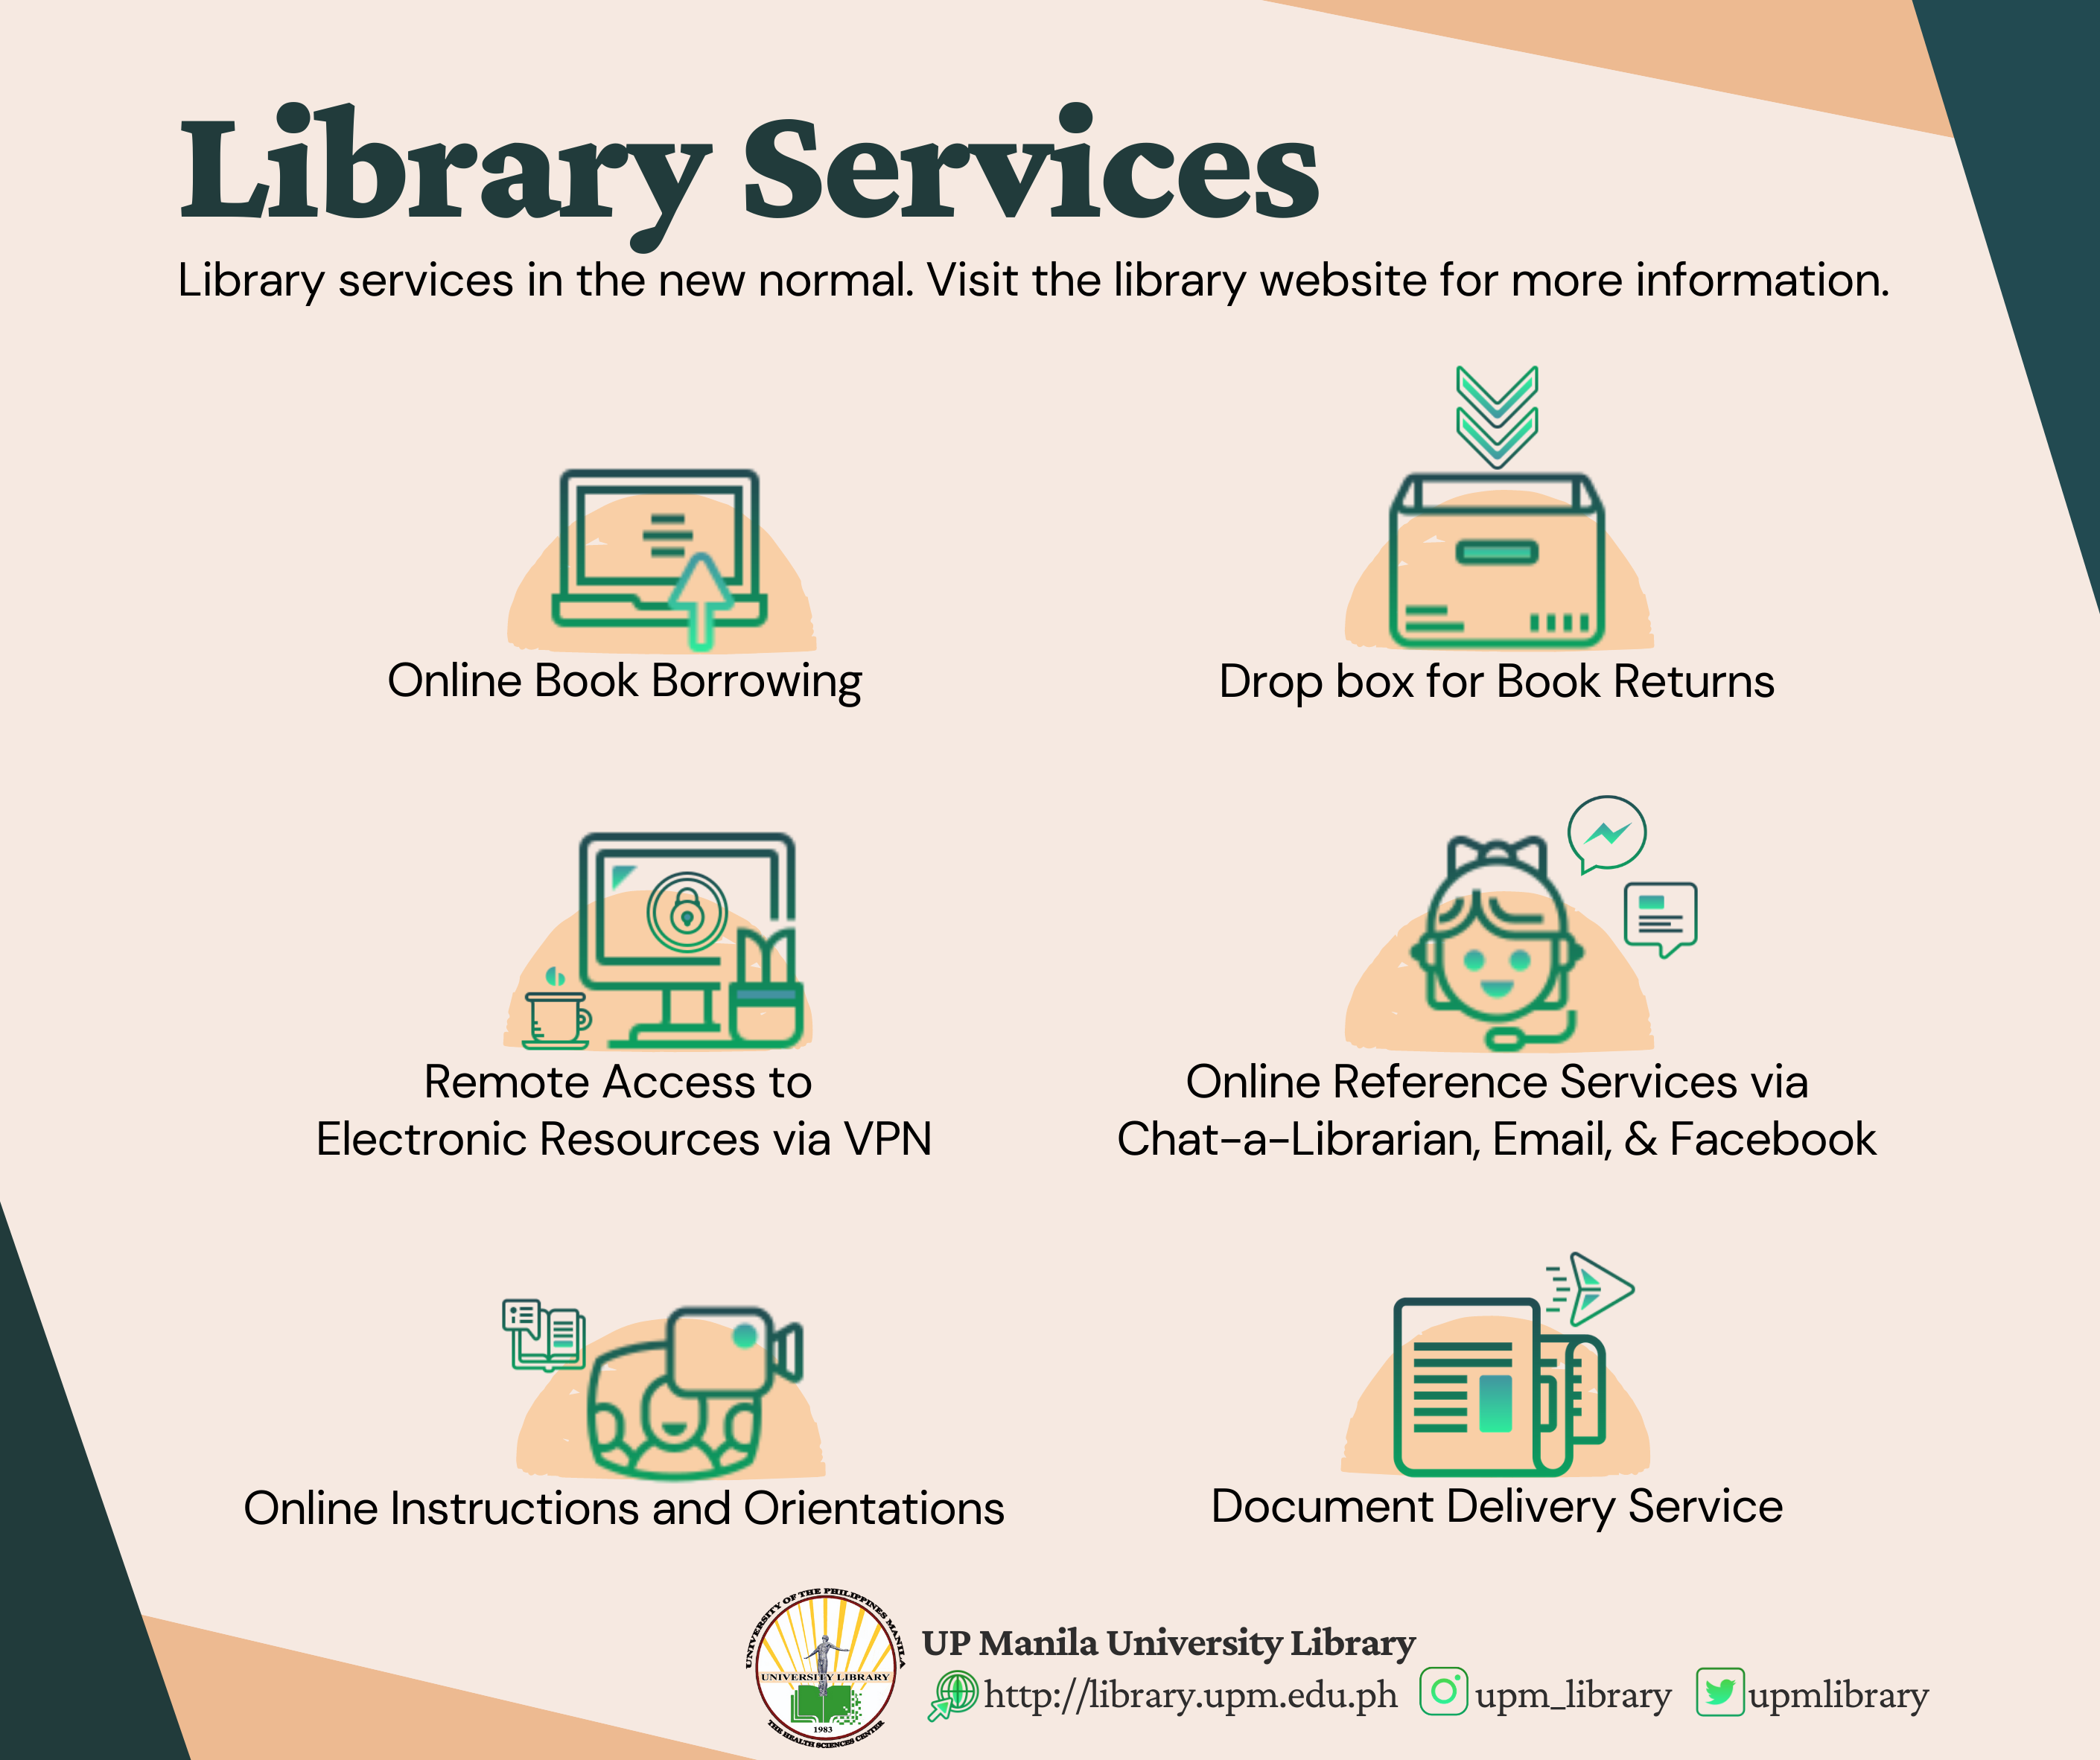 library-guidelines-in-the-new-normal-university-library